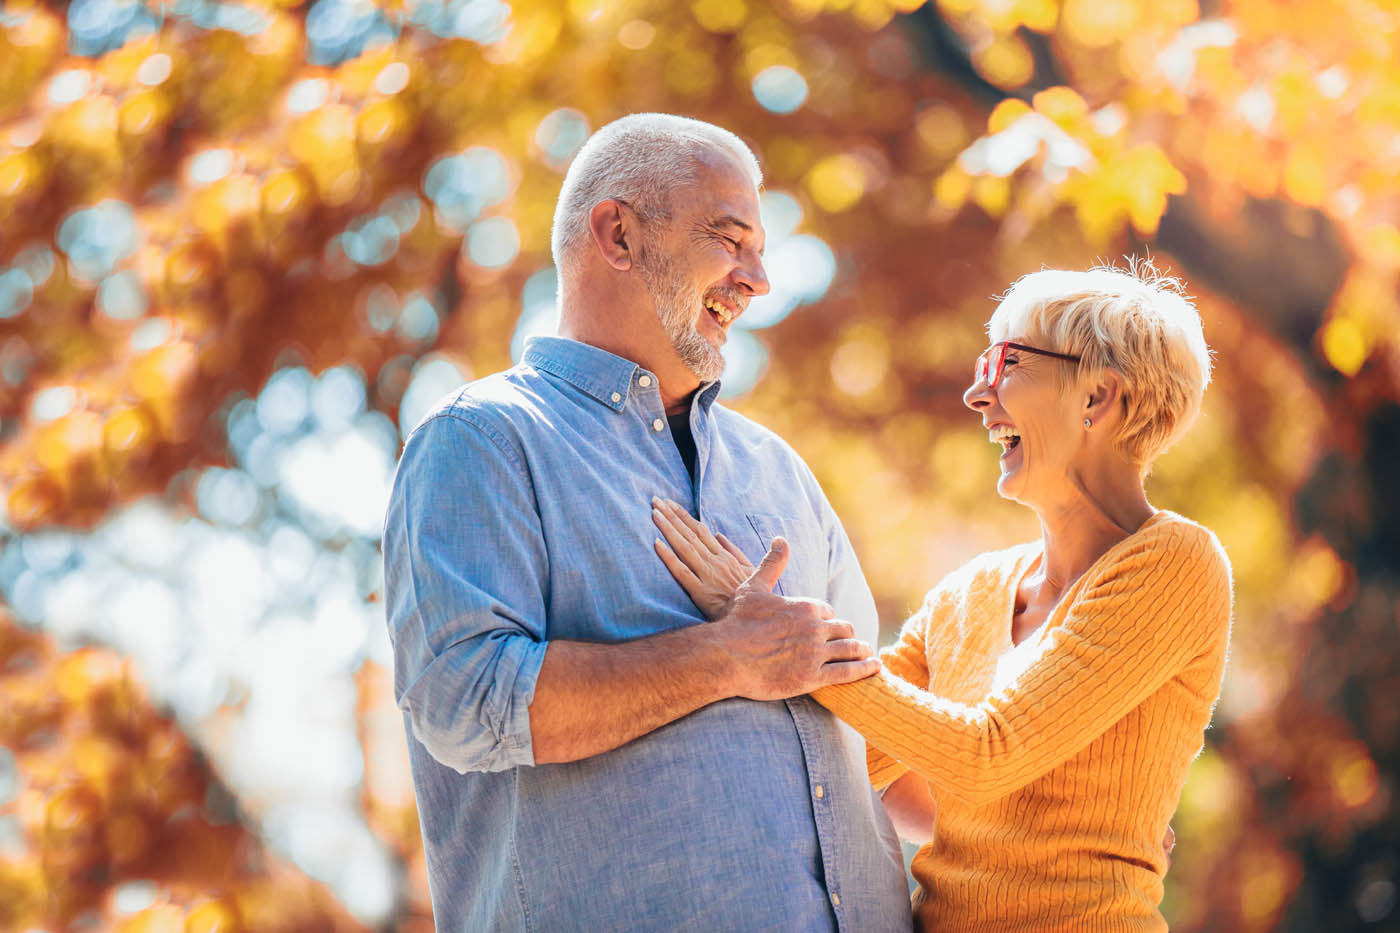 Two older people outside in the fall weather - loving each other and the affects of bbl photofacial in Southlake.